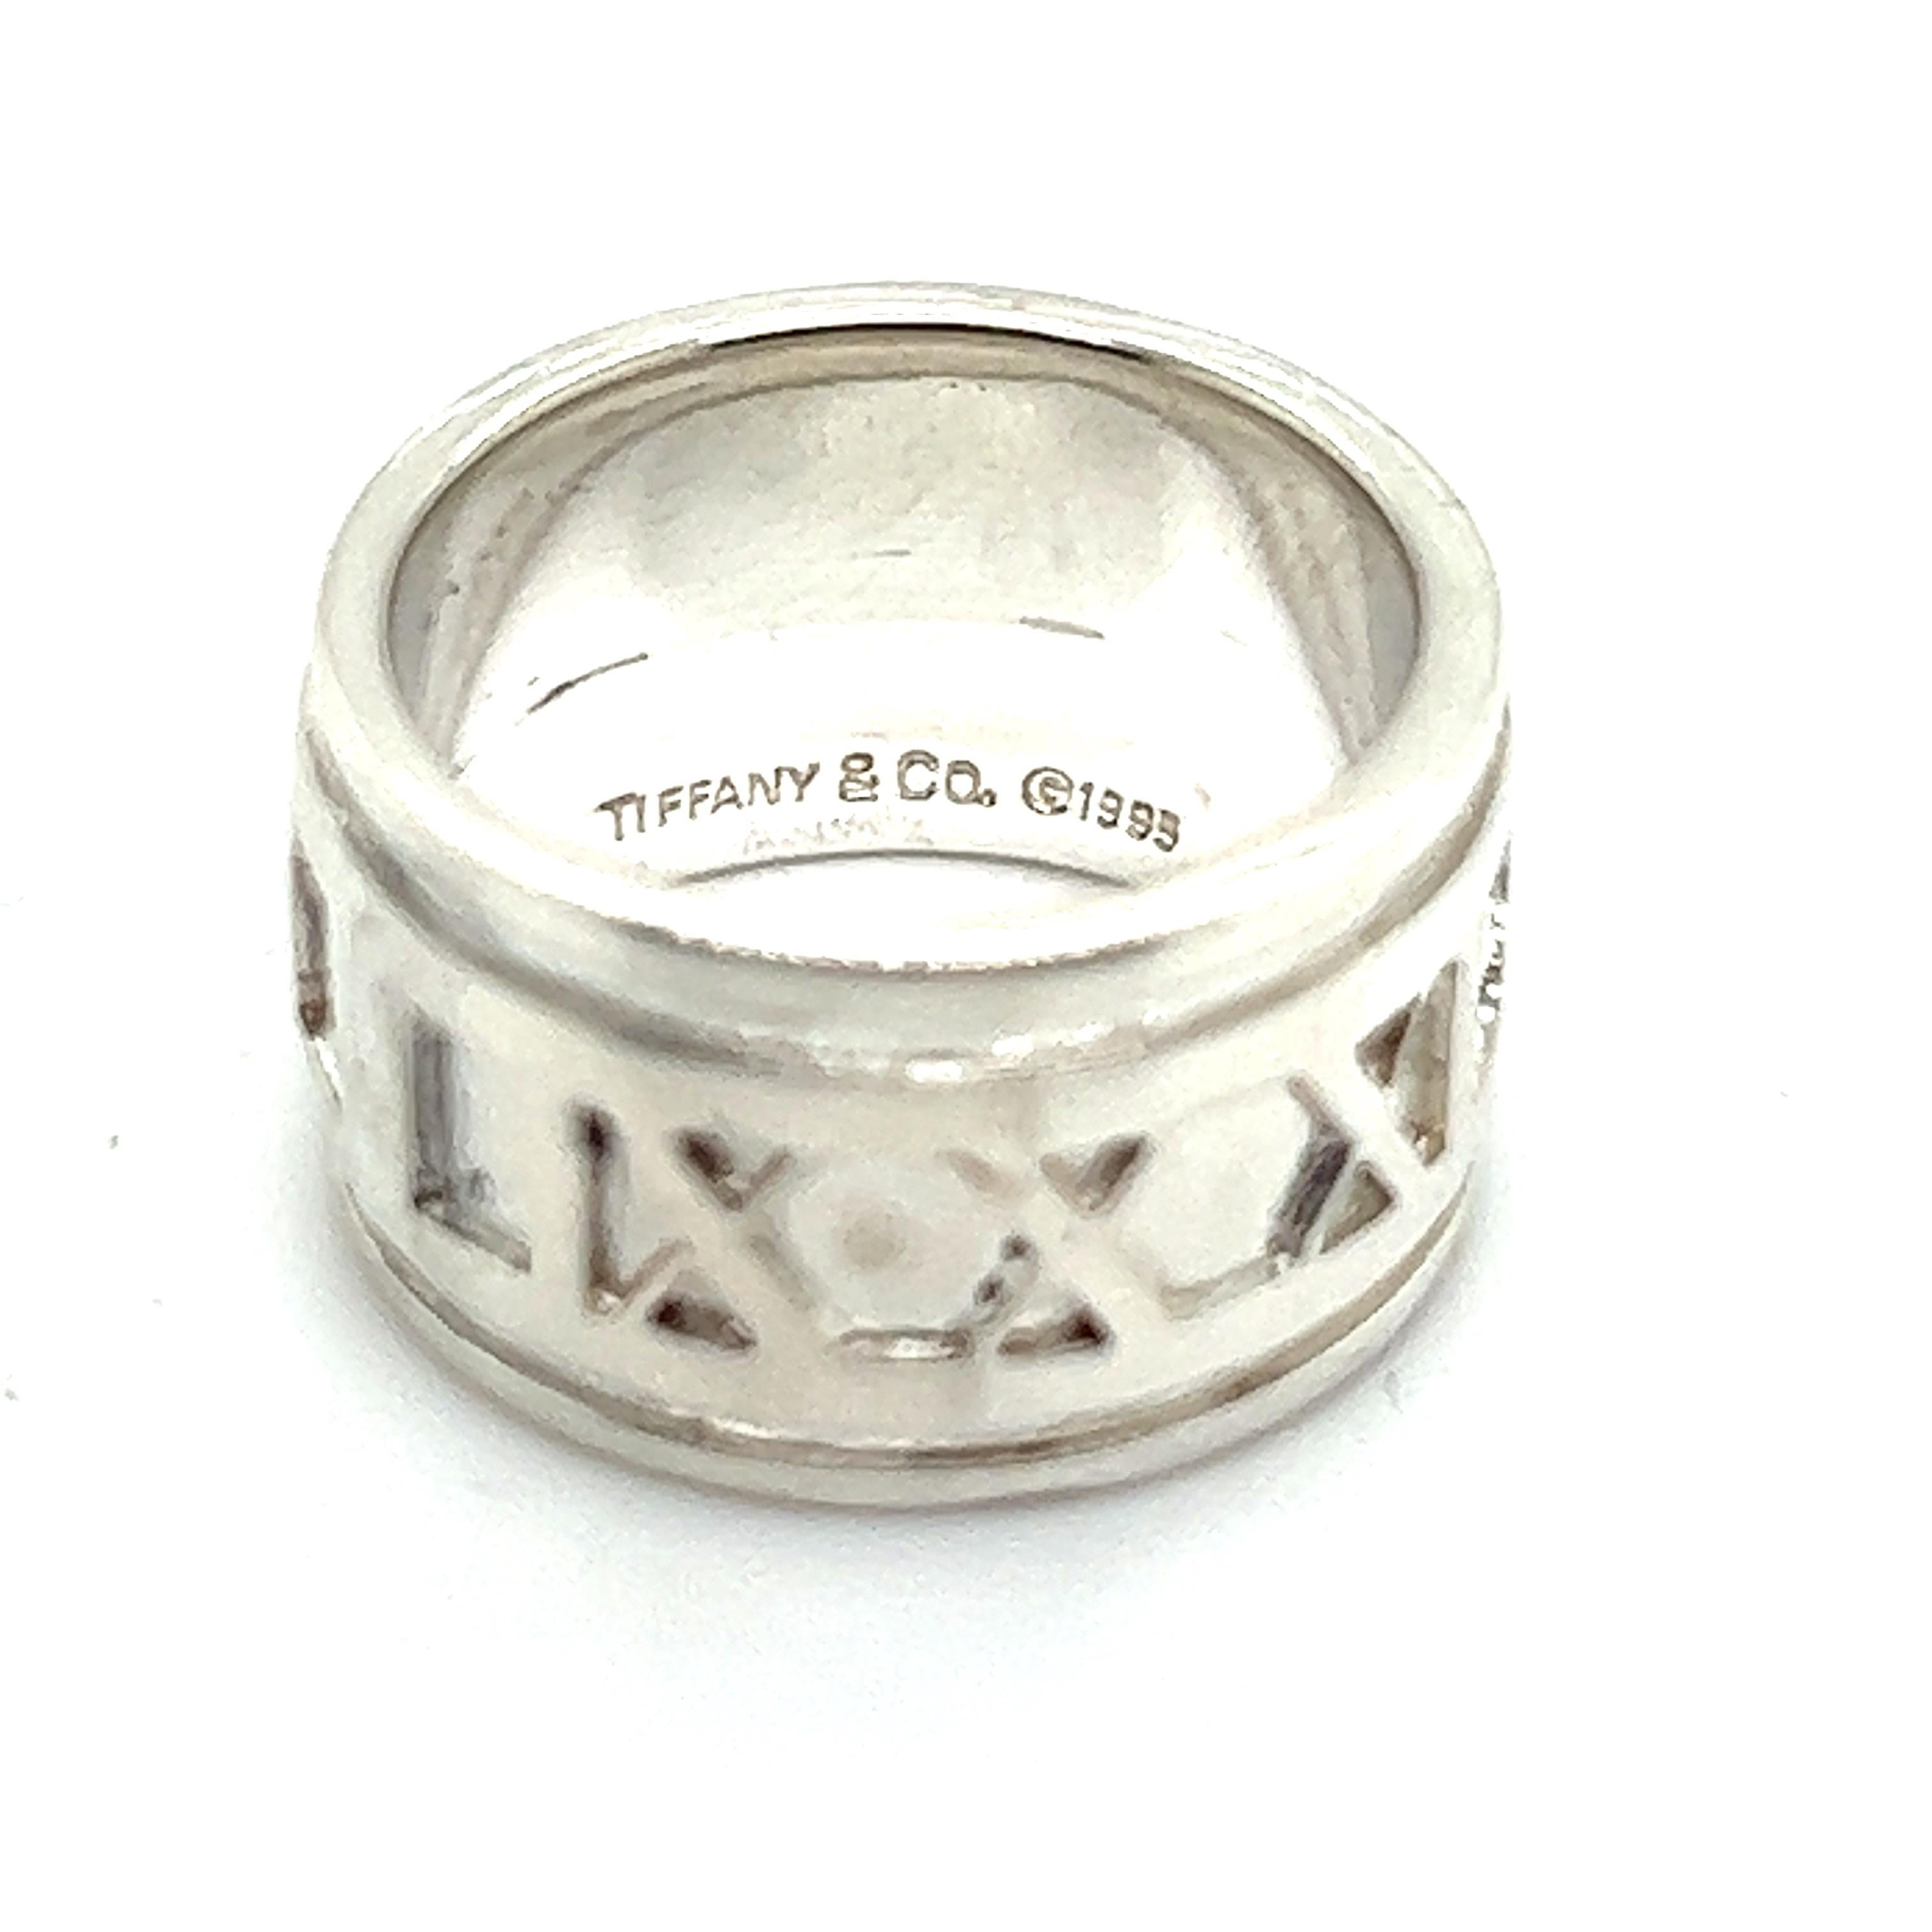 5.25 ring size